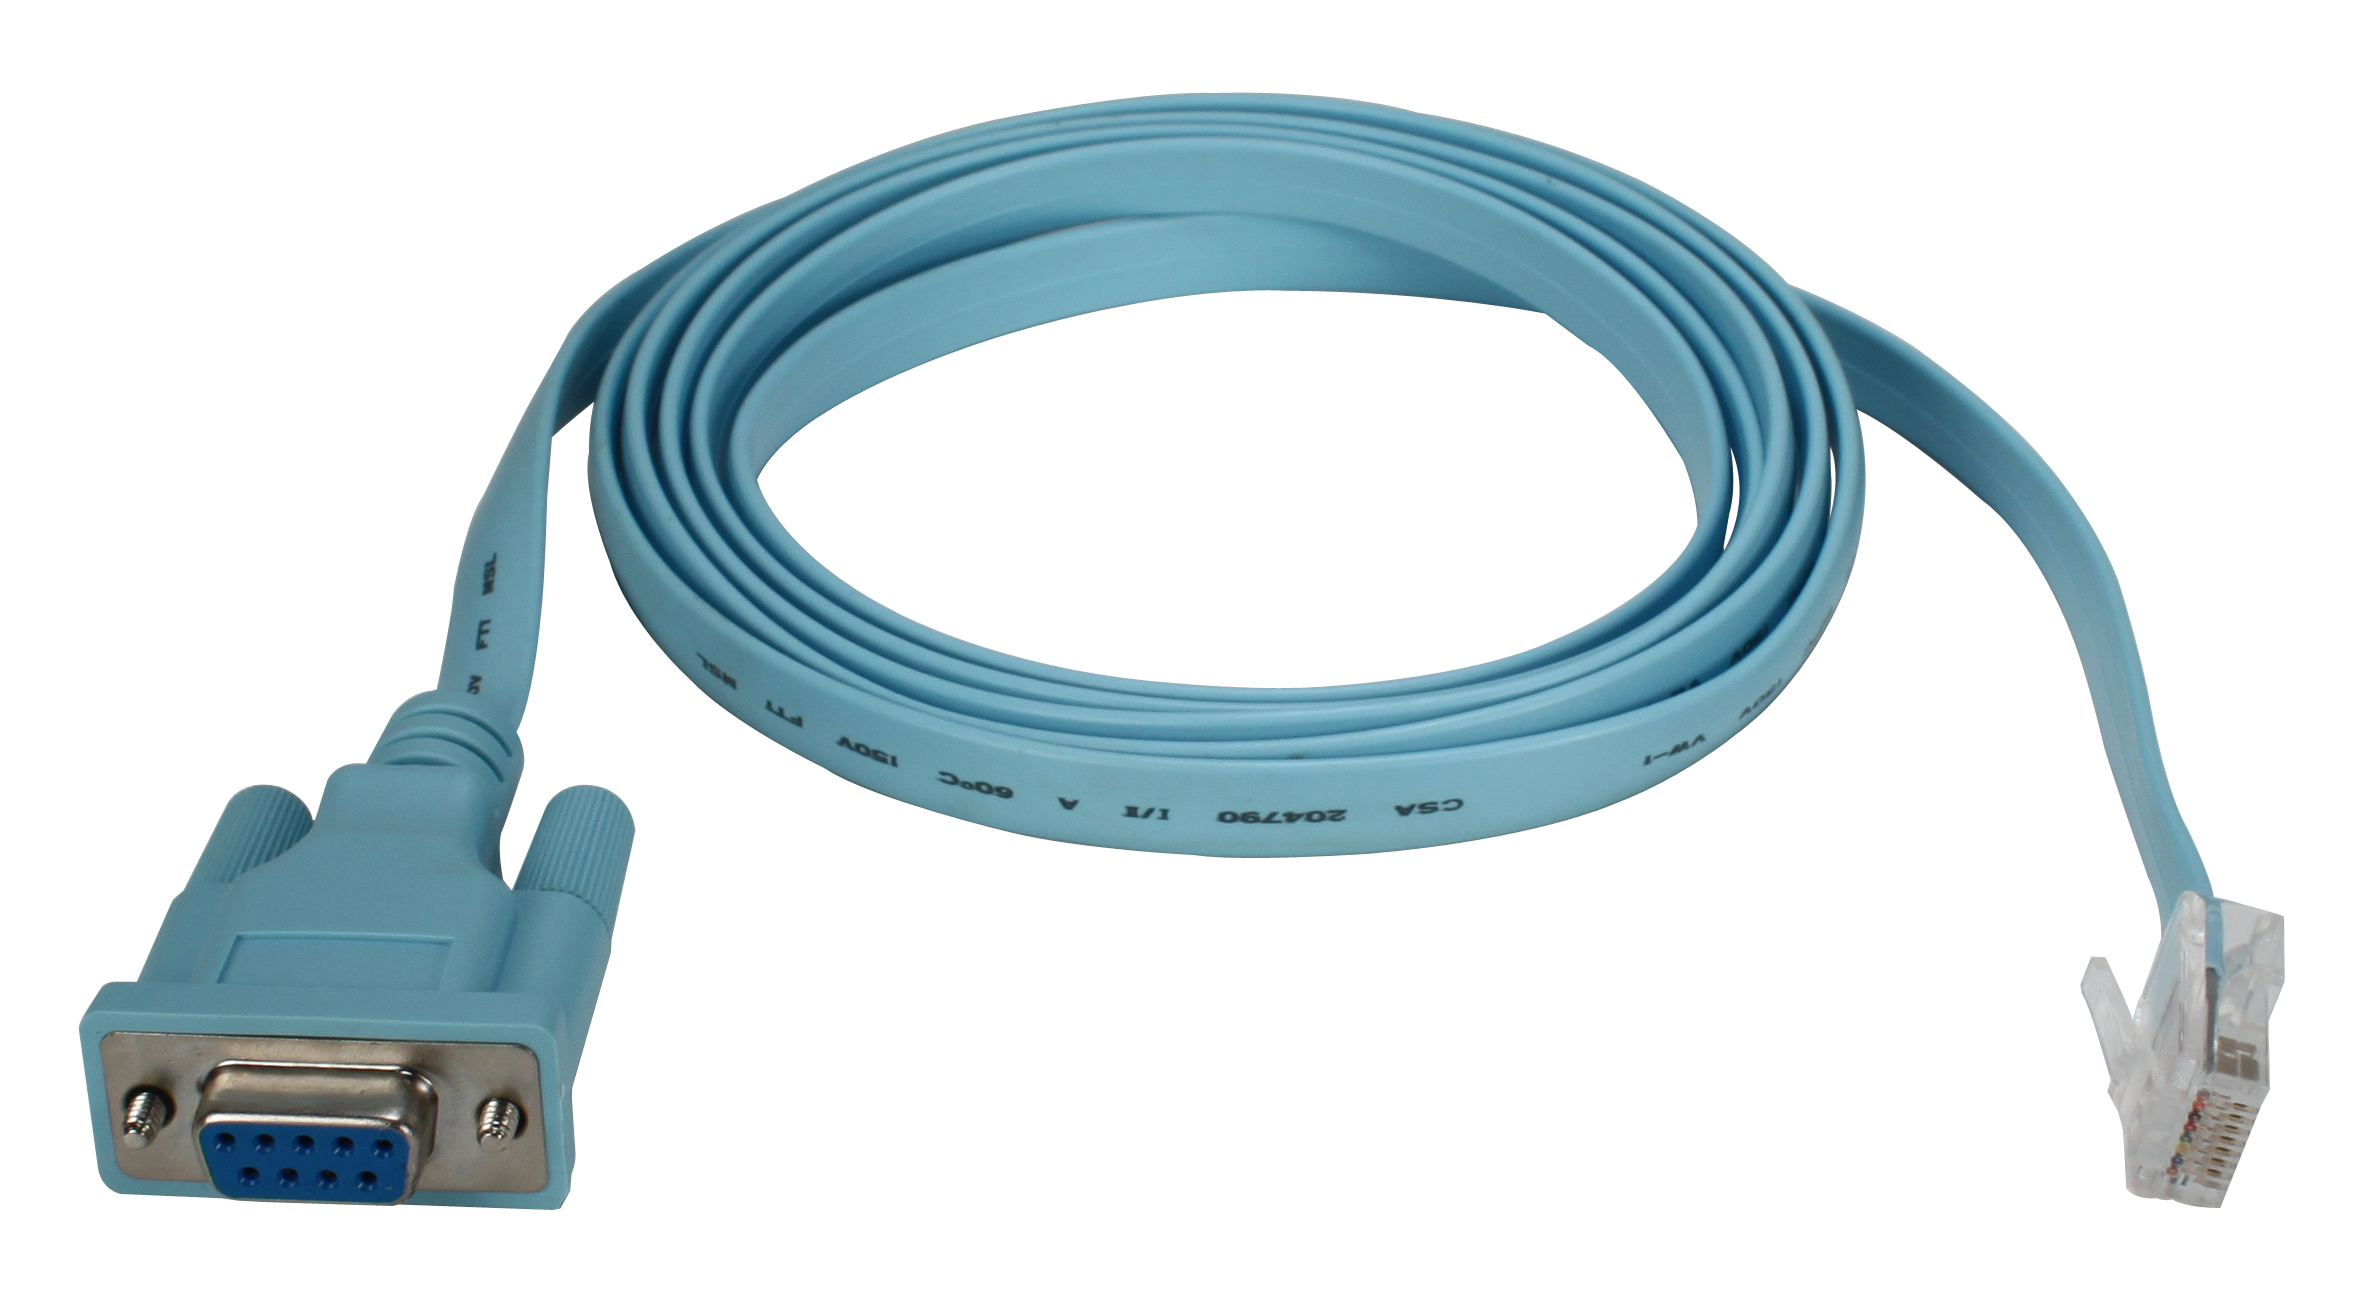 Rollover Console Cable, RJ45 to RJ45, 6ft